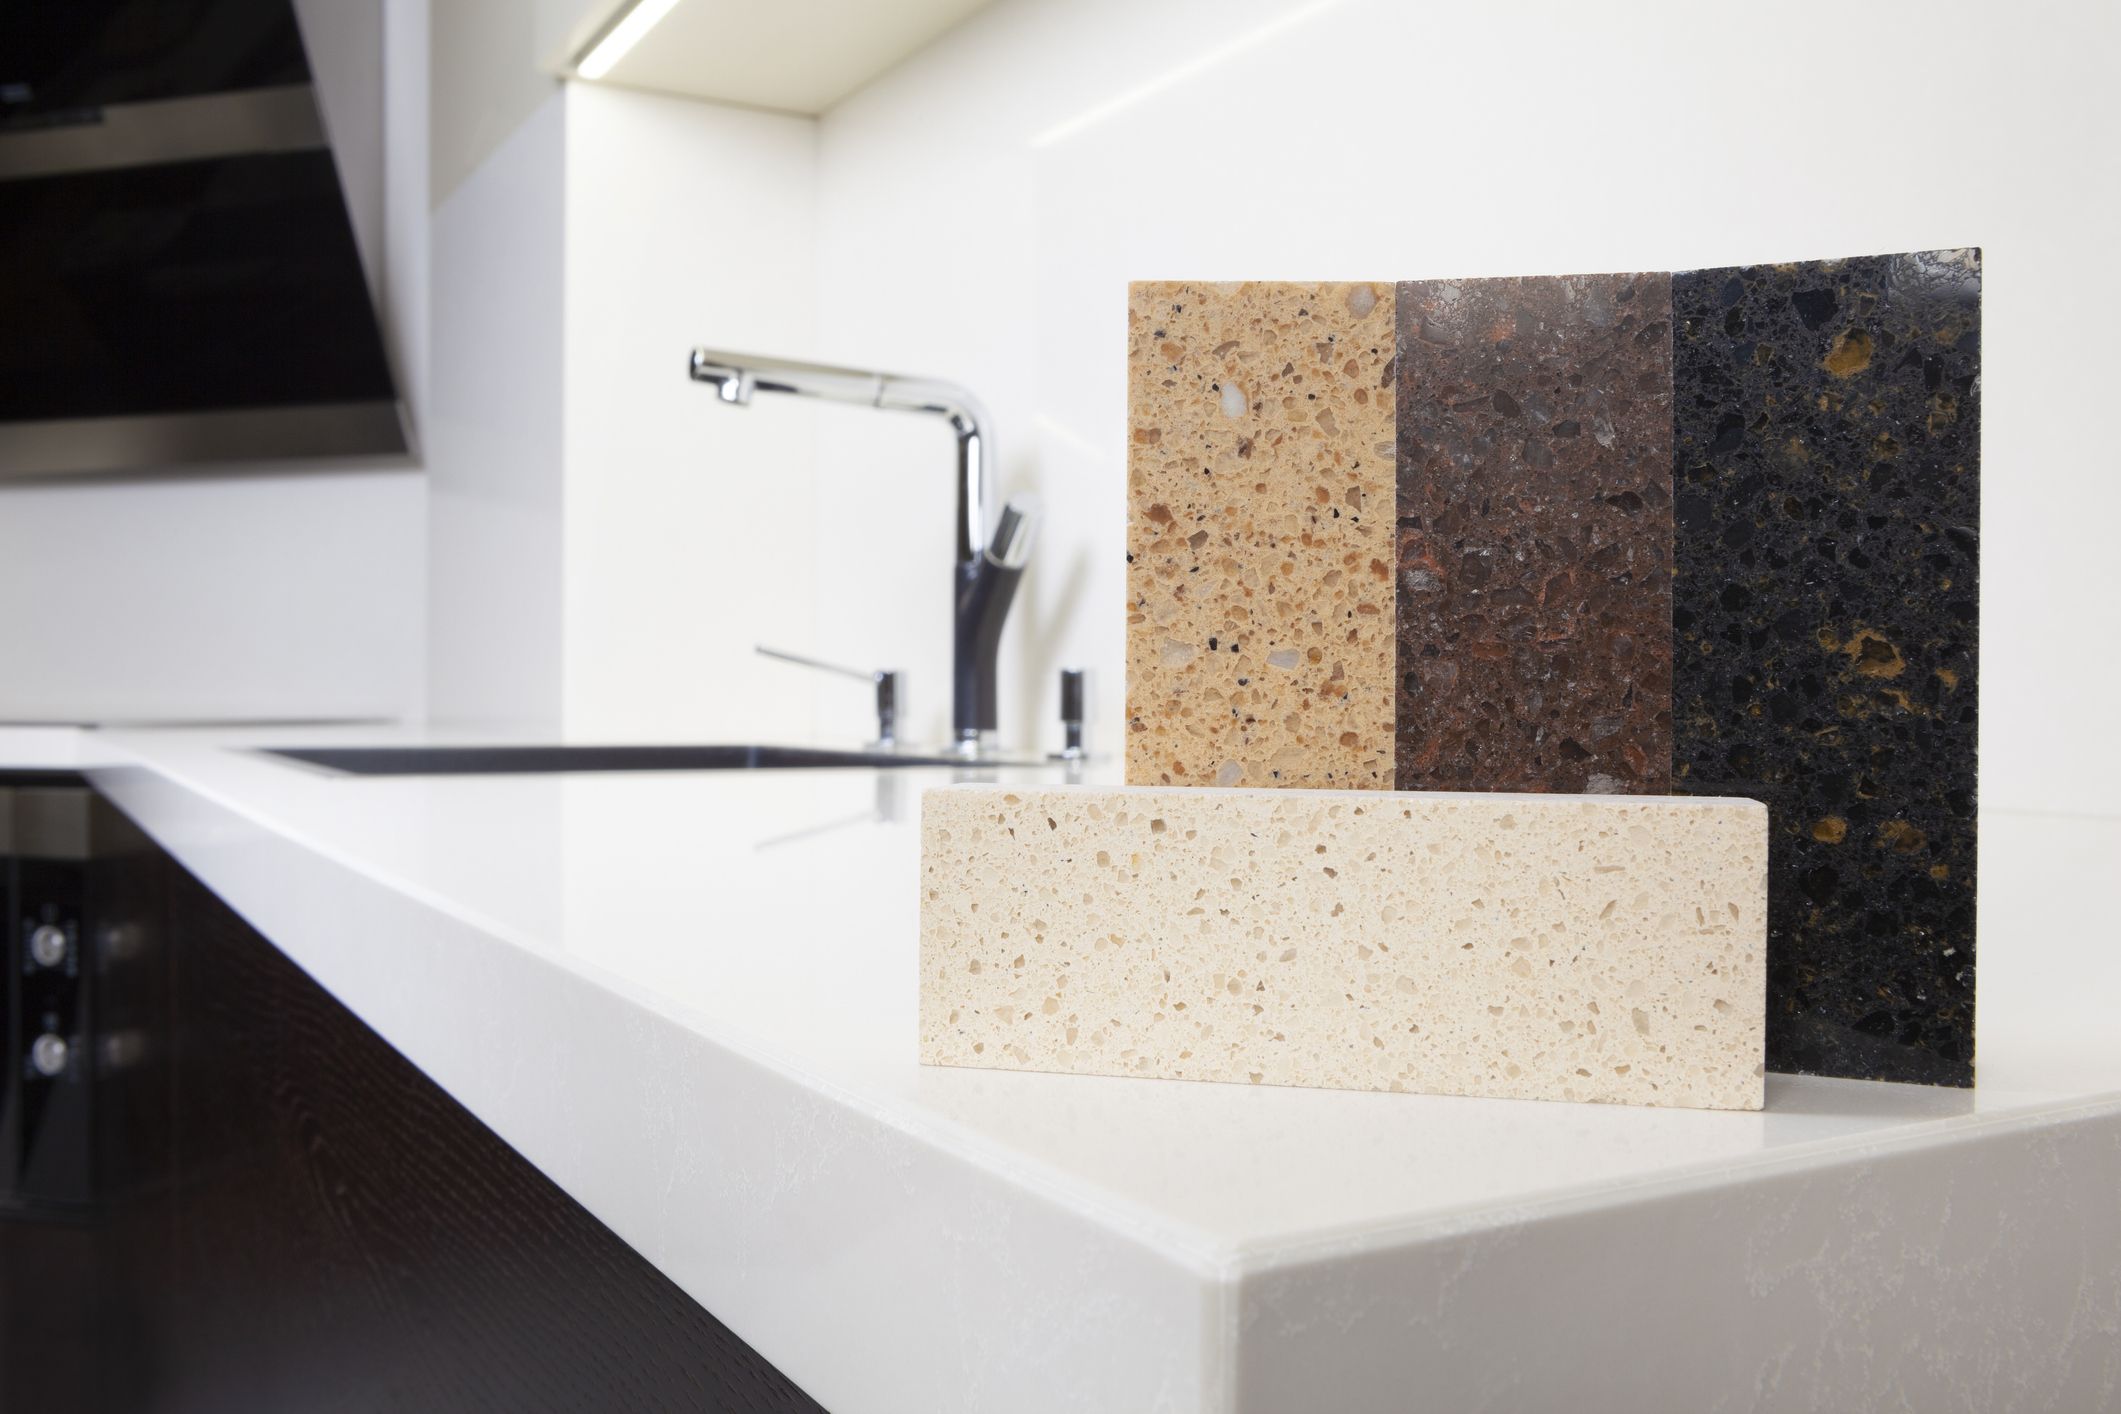 The Best Countertop Options For Kitchens, How To Select Laminate Countertops